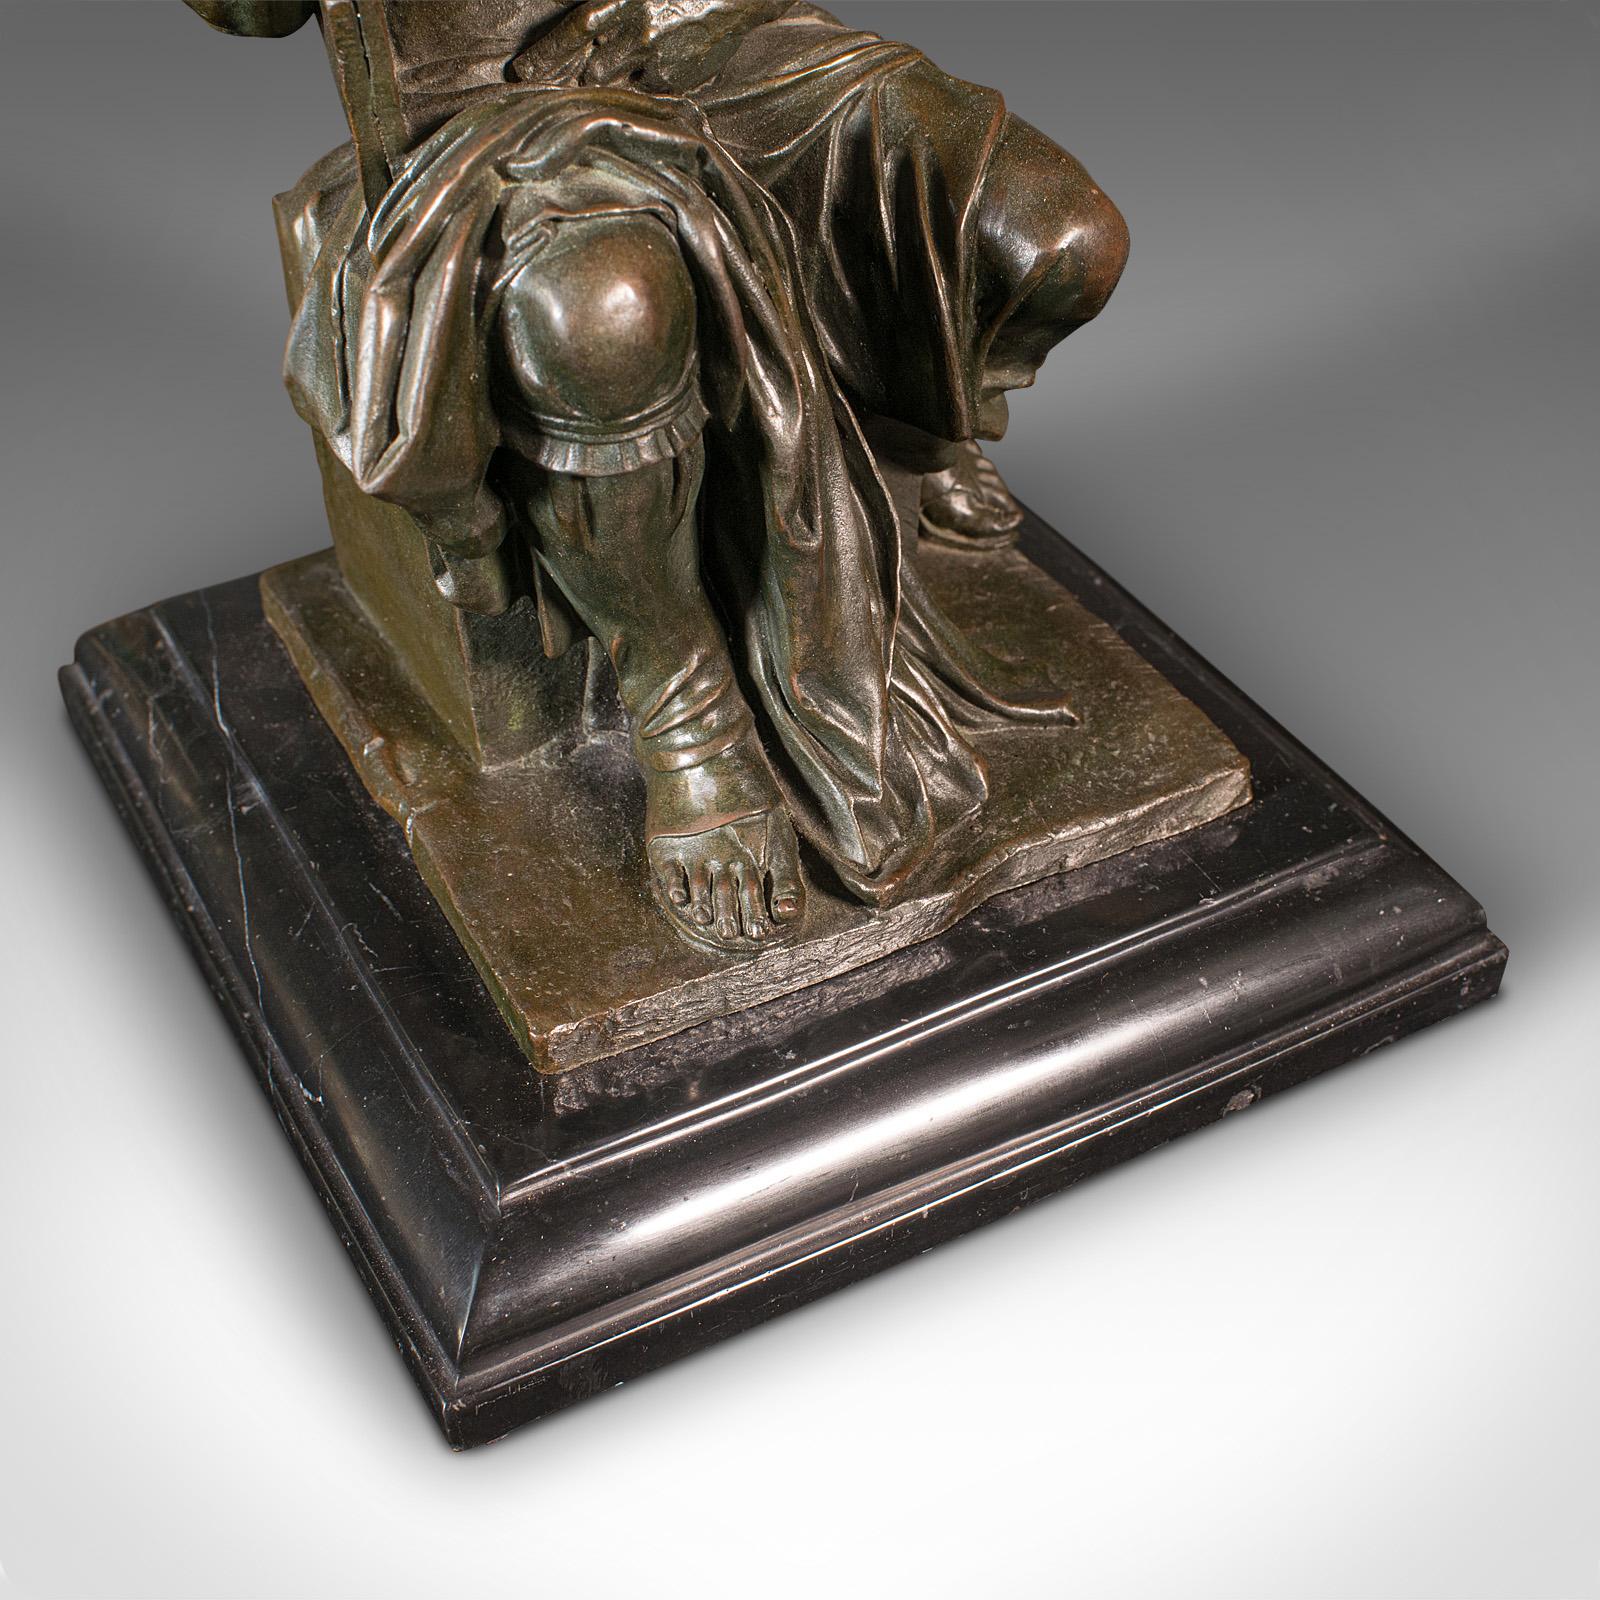 Vintage Decorative Figure of Moses, English, Bronze, Statue, After Michelangelo For Sale 2